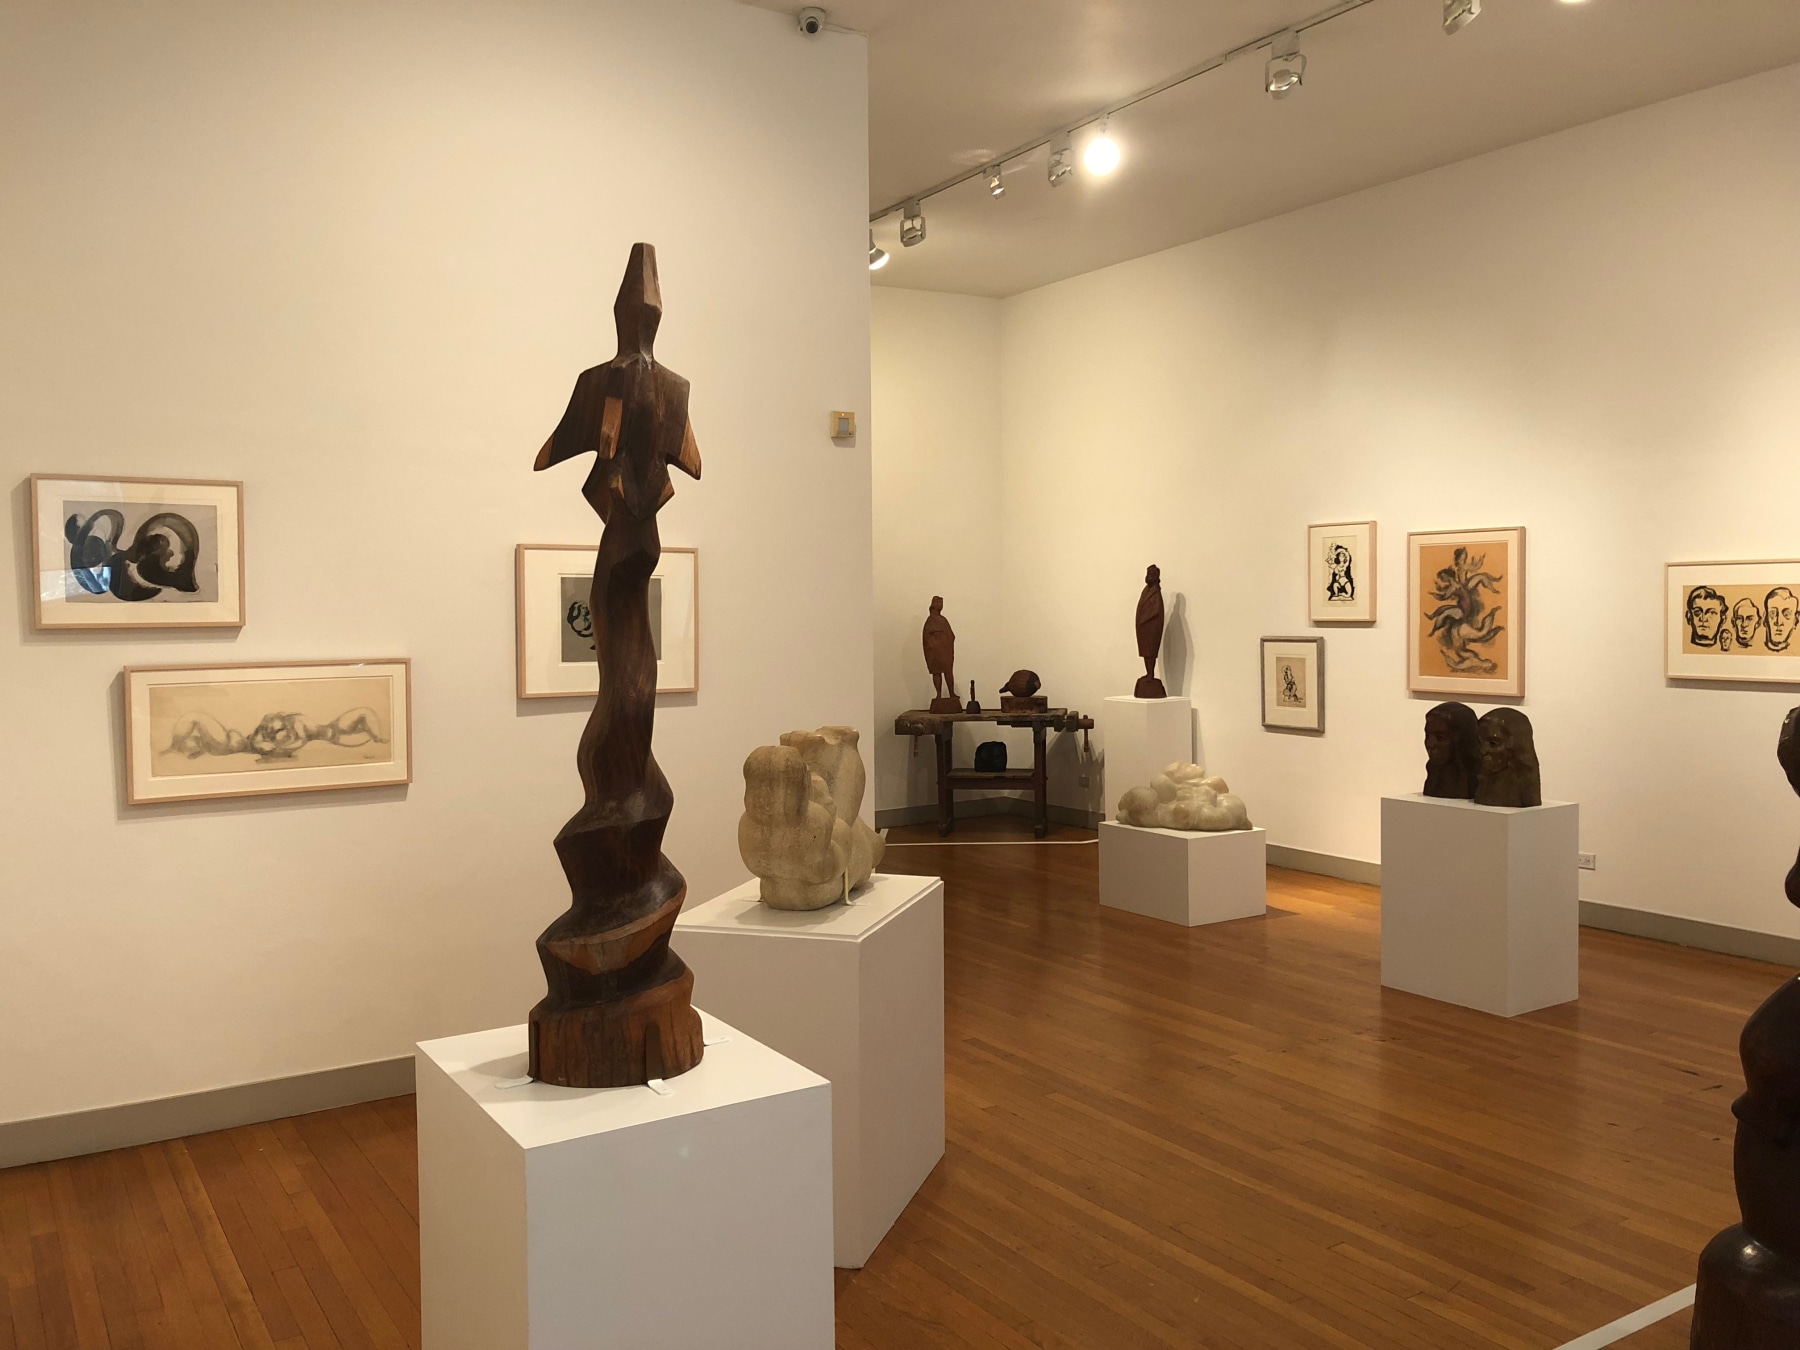 Partial view of a gallery room and a hallway with white walls and medium brown flooring. There are many large sculpture on white rectangular mounts in organic shapes, in brown, white, and black. On the walls there are scatterings of framed sketches of the sculptures.